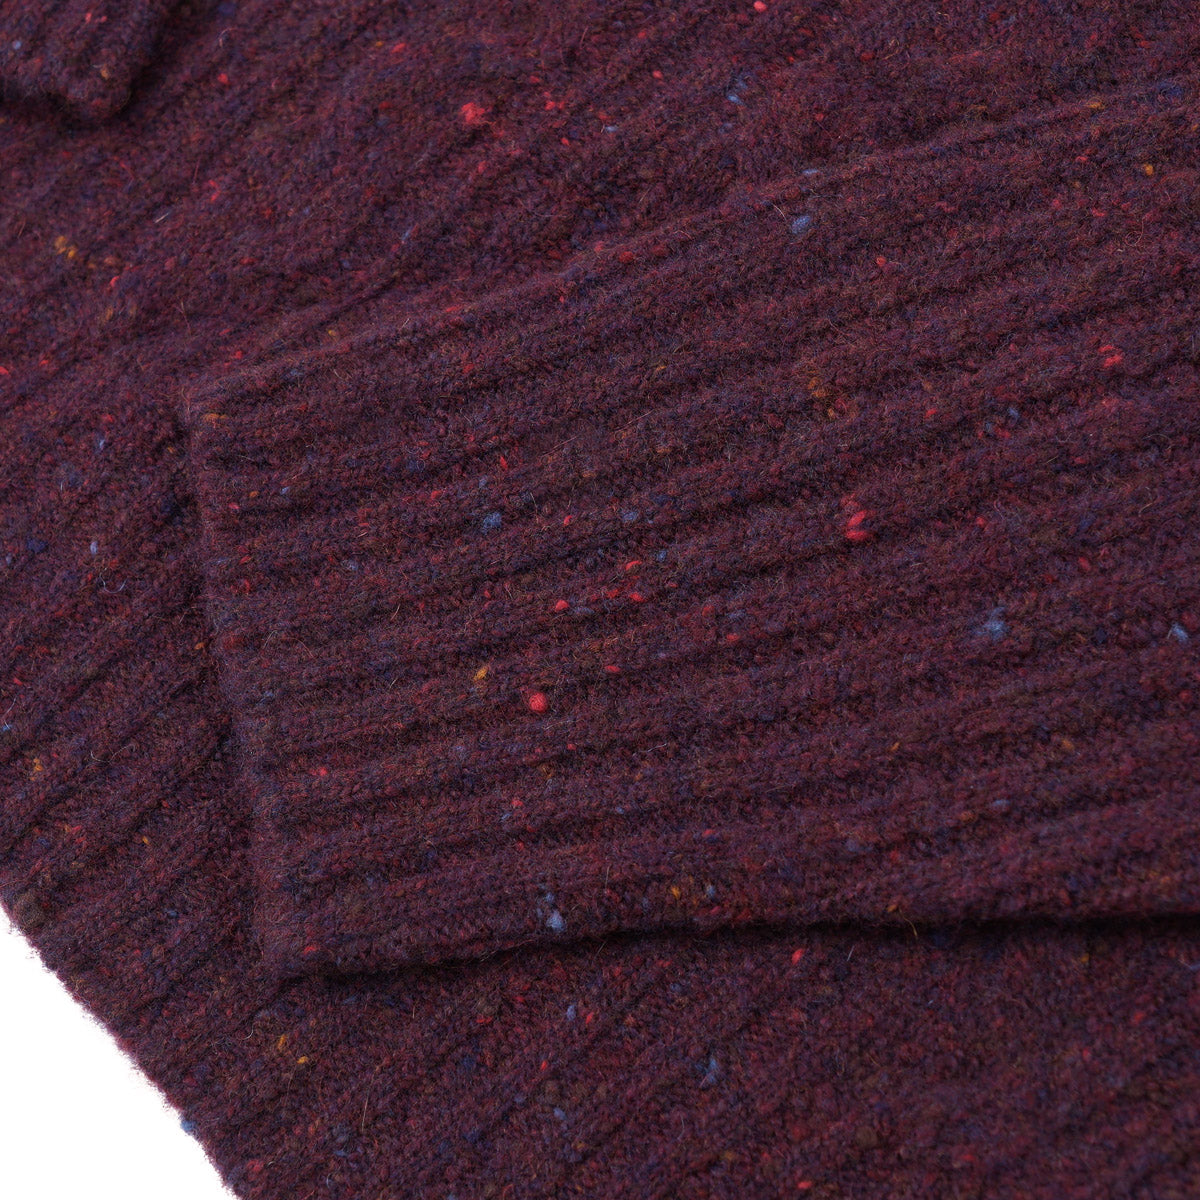 Drumohr Cable Knit Wool-Cashmere Sweater - Top Shelf Apparel